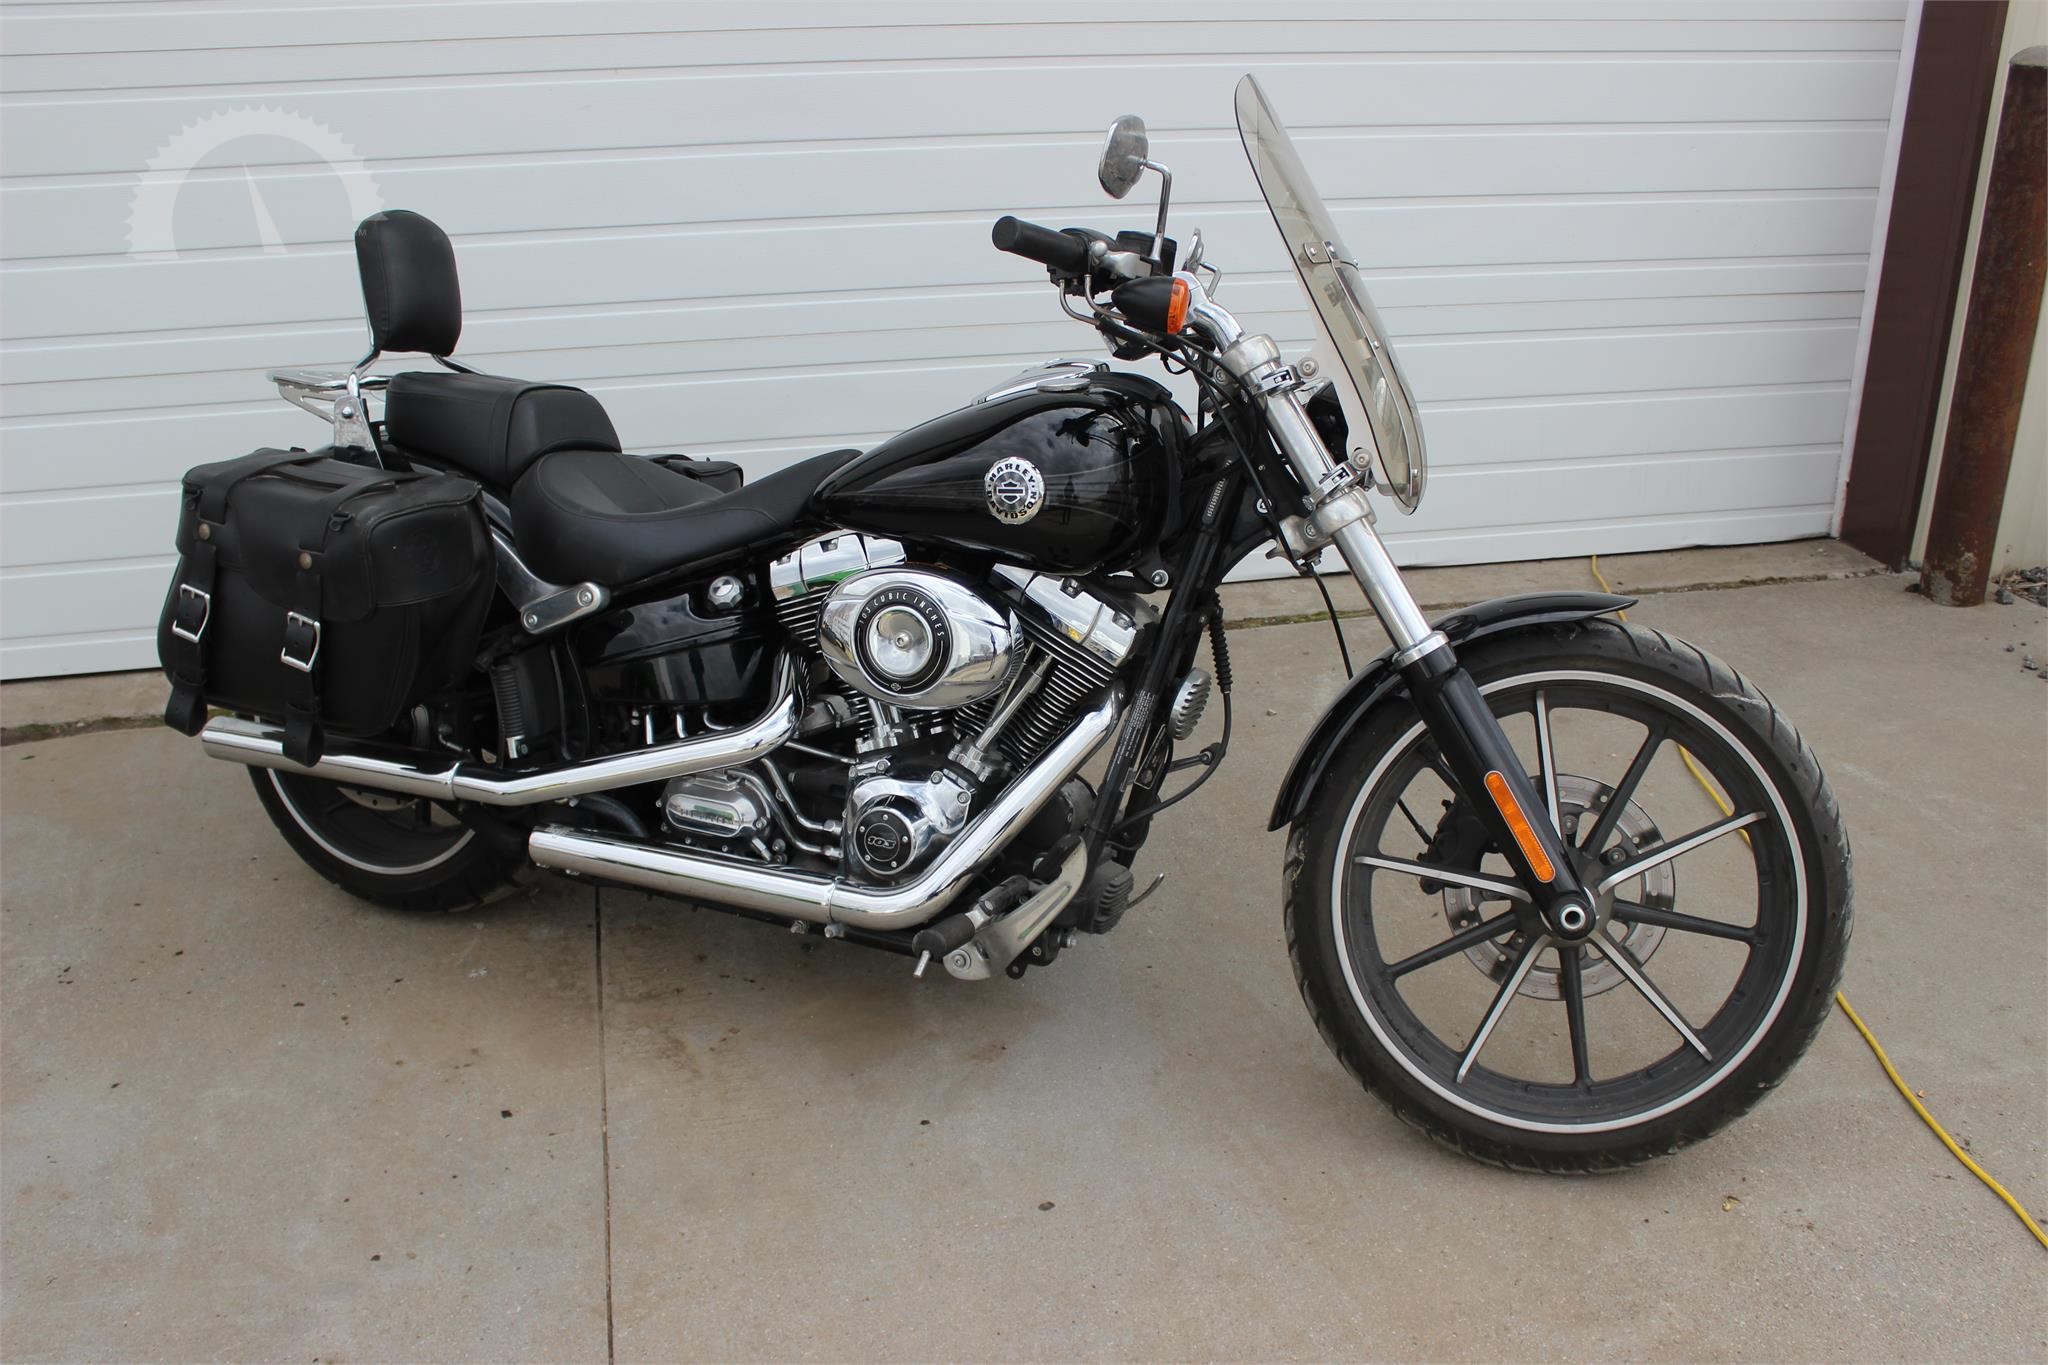 Harley Davidson Motorcycles Auction Results 33 Listings Auctiontime Com Page 1 Of 2